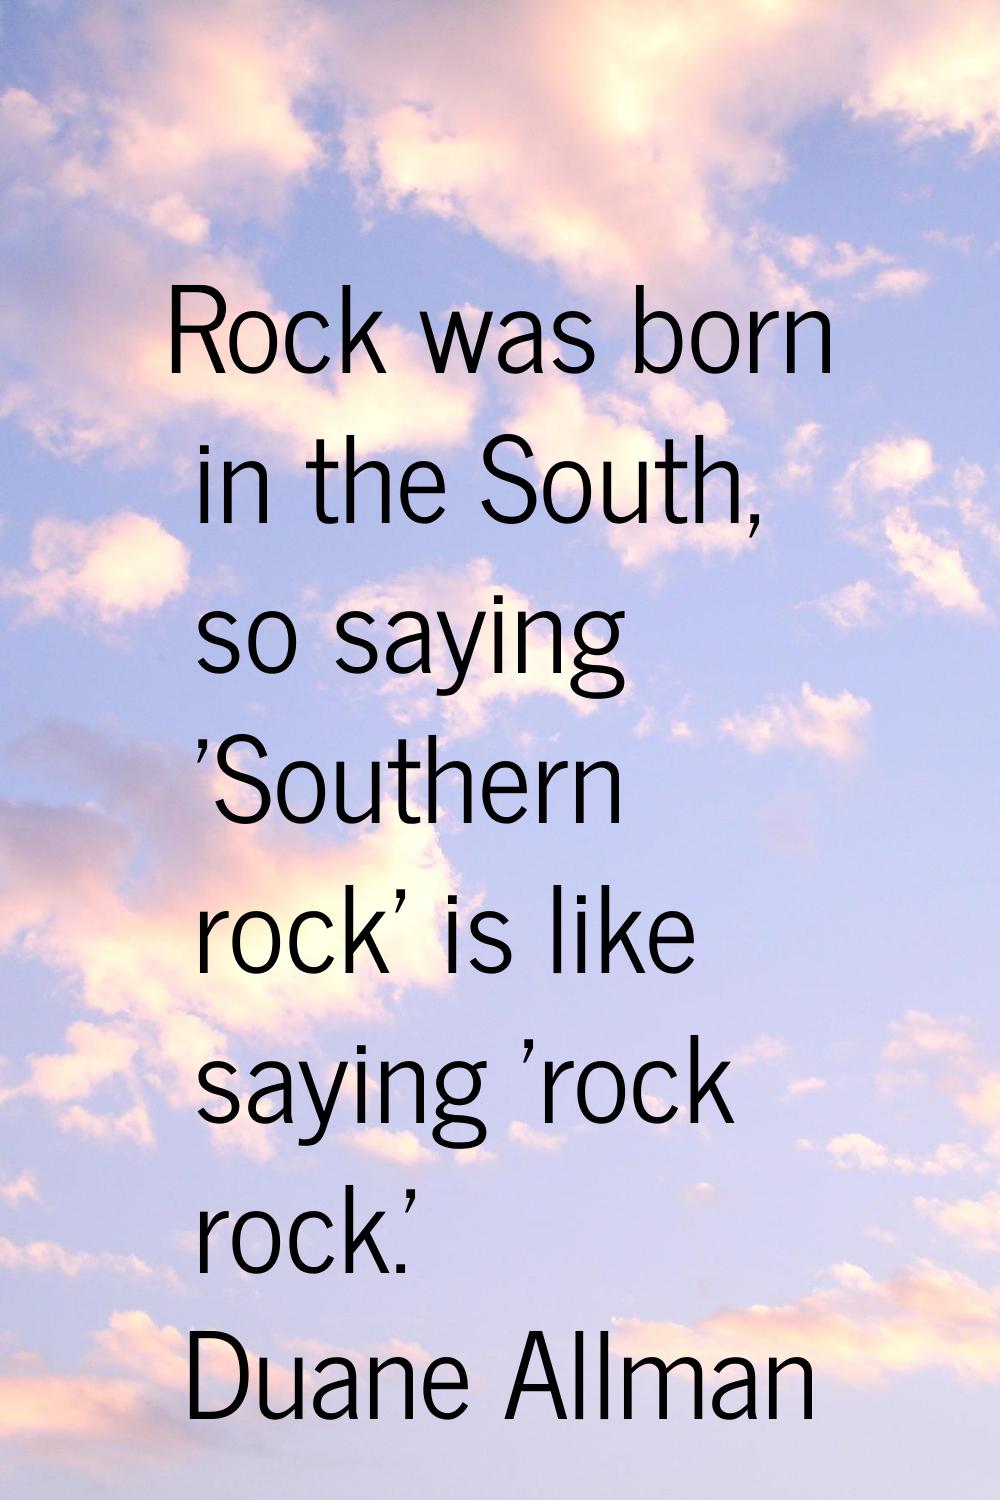 Rock was born in the South, so saying 'Southern rock' is like saying 'rock rock.'